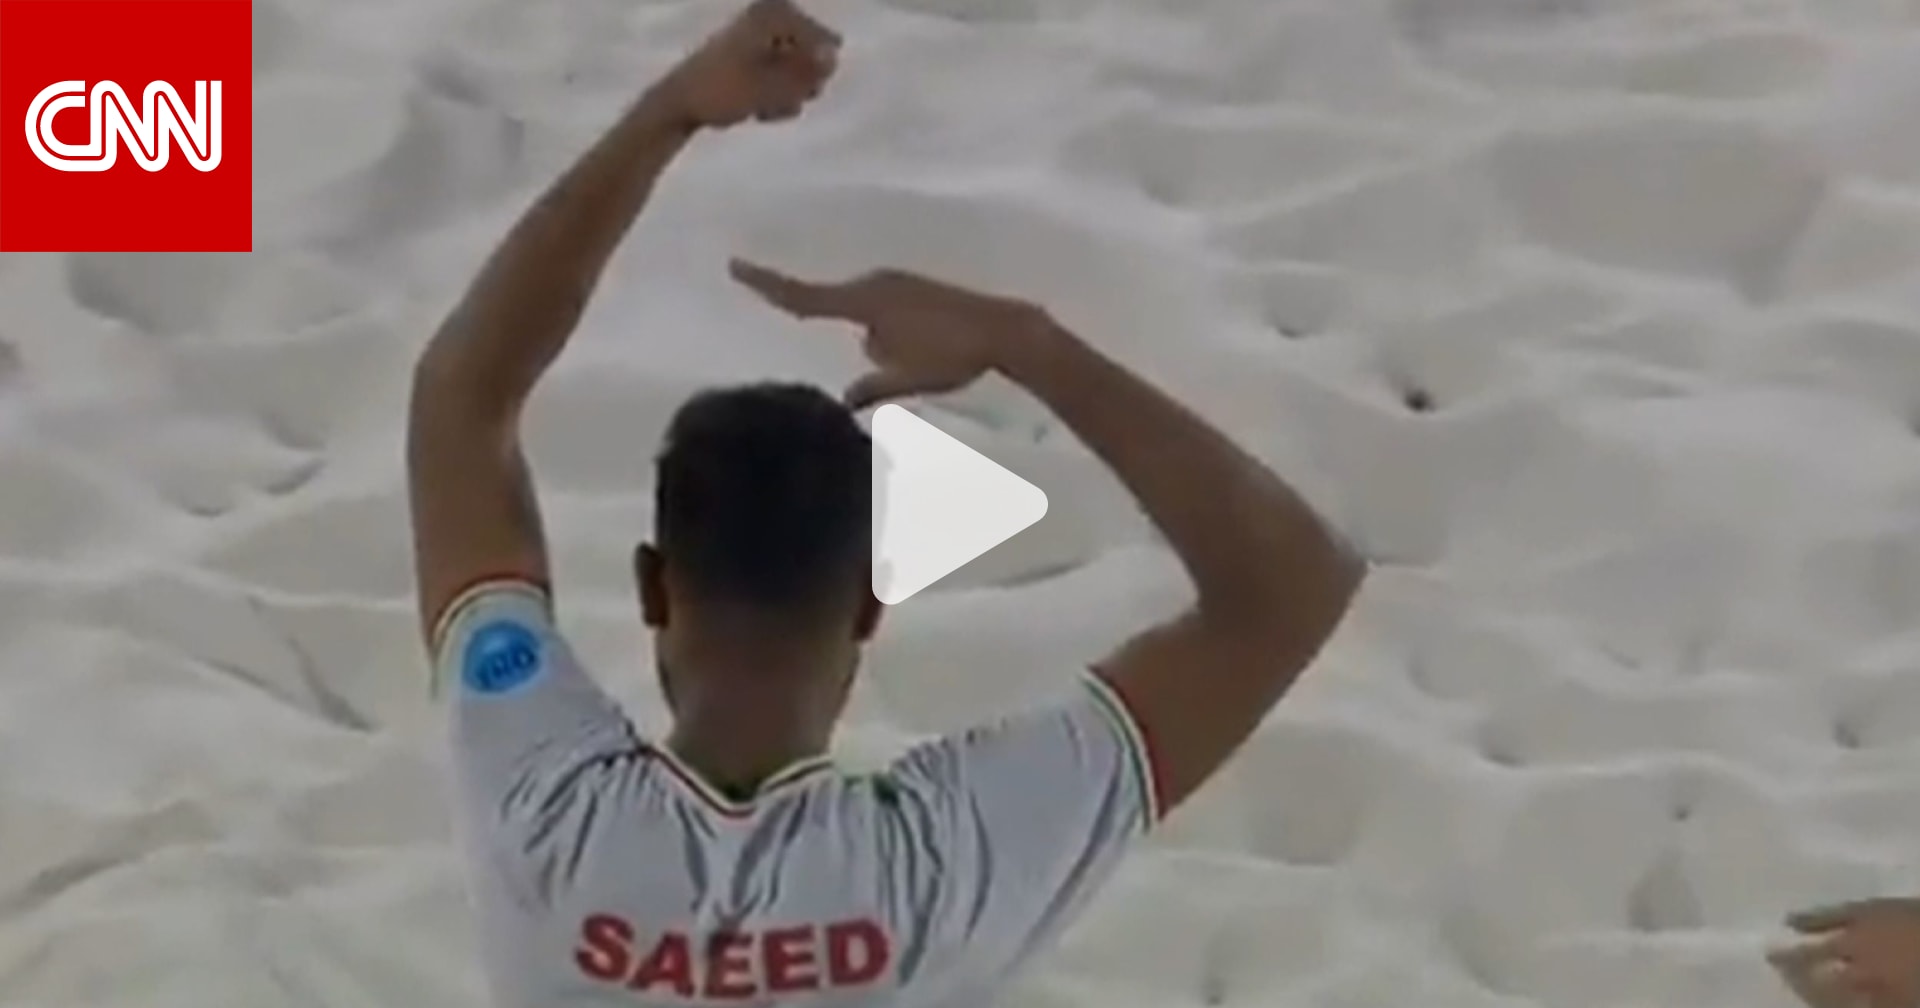 Behold… an Iranian player shows solidarity with Iranian protesters during an international tournament